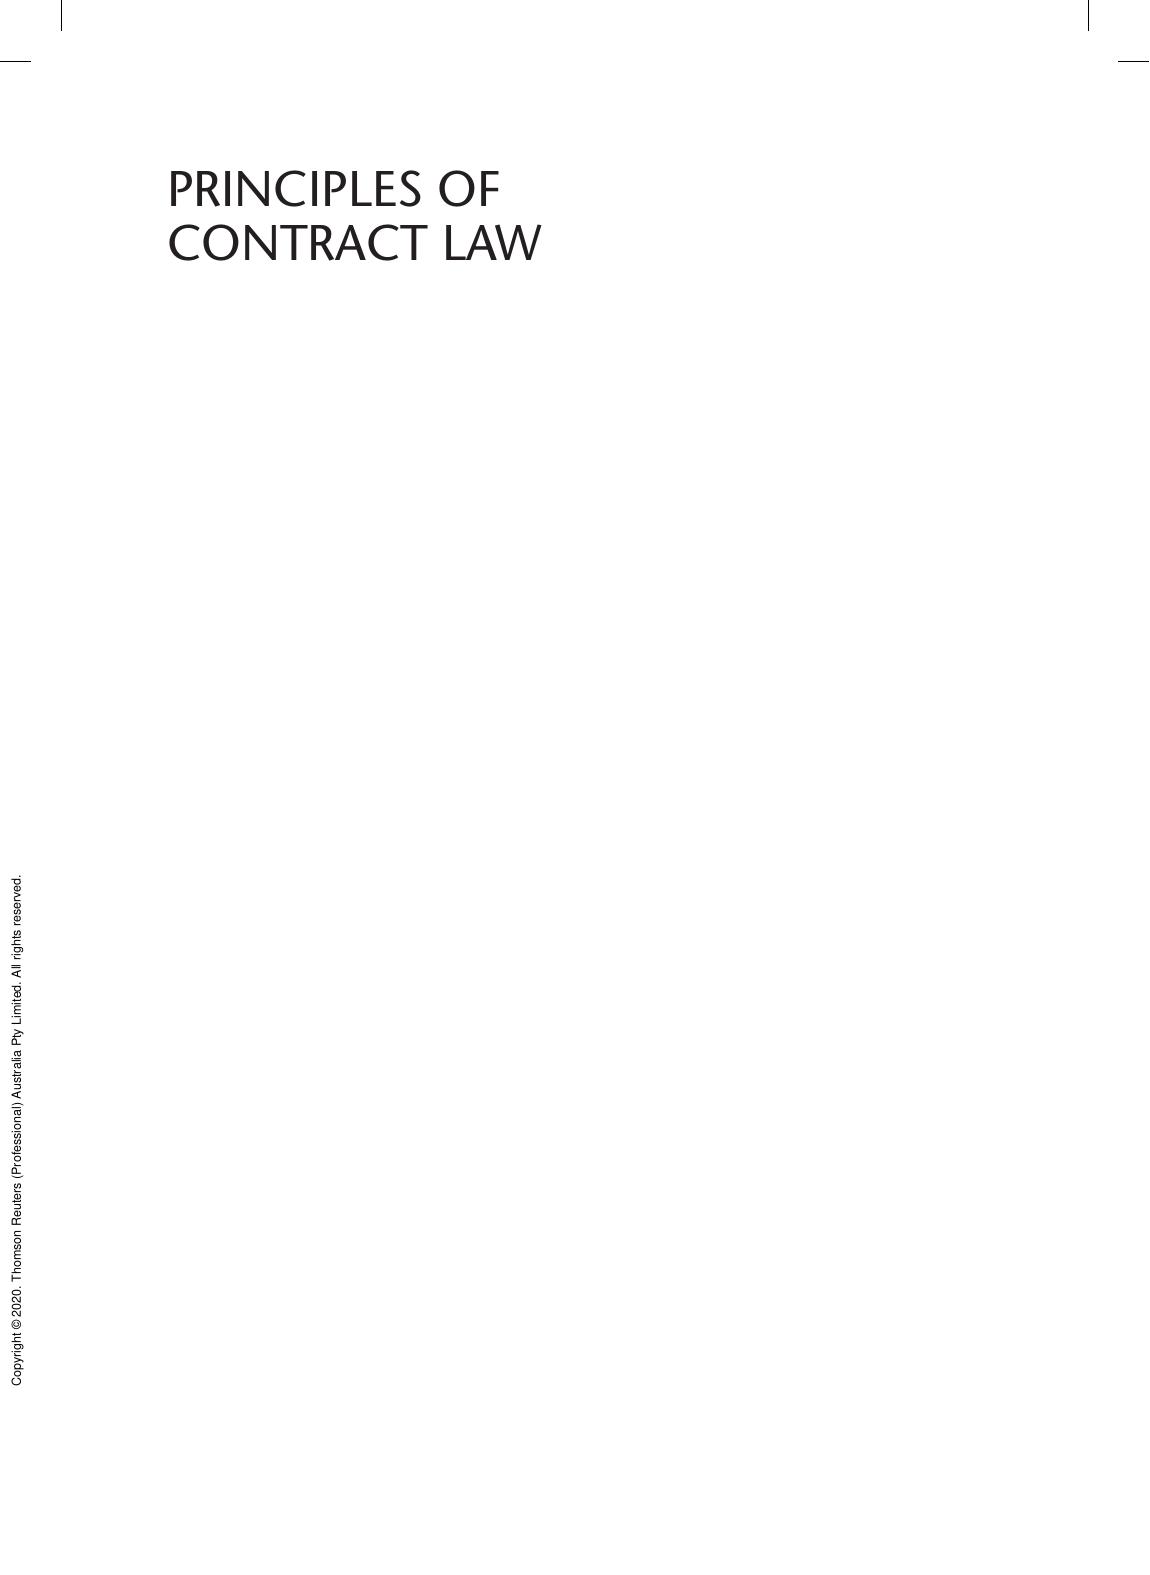 Principles of contract law 2020